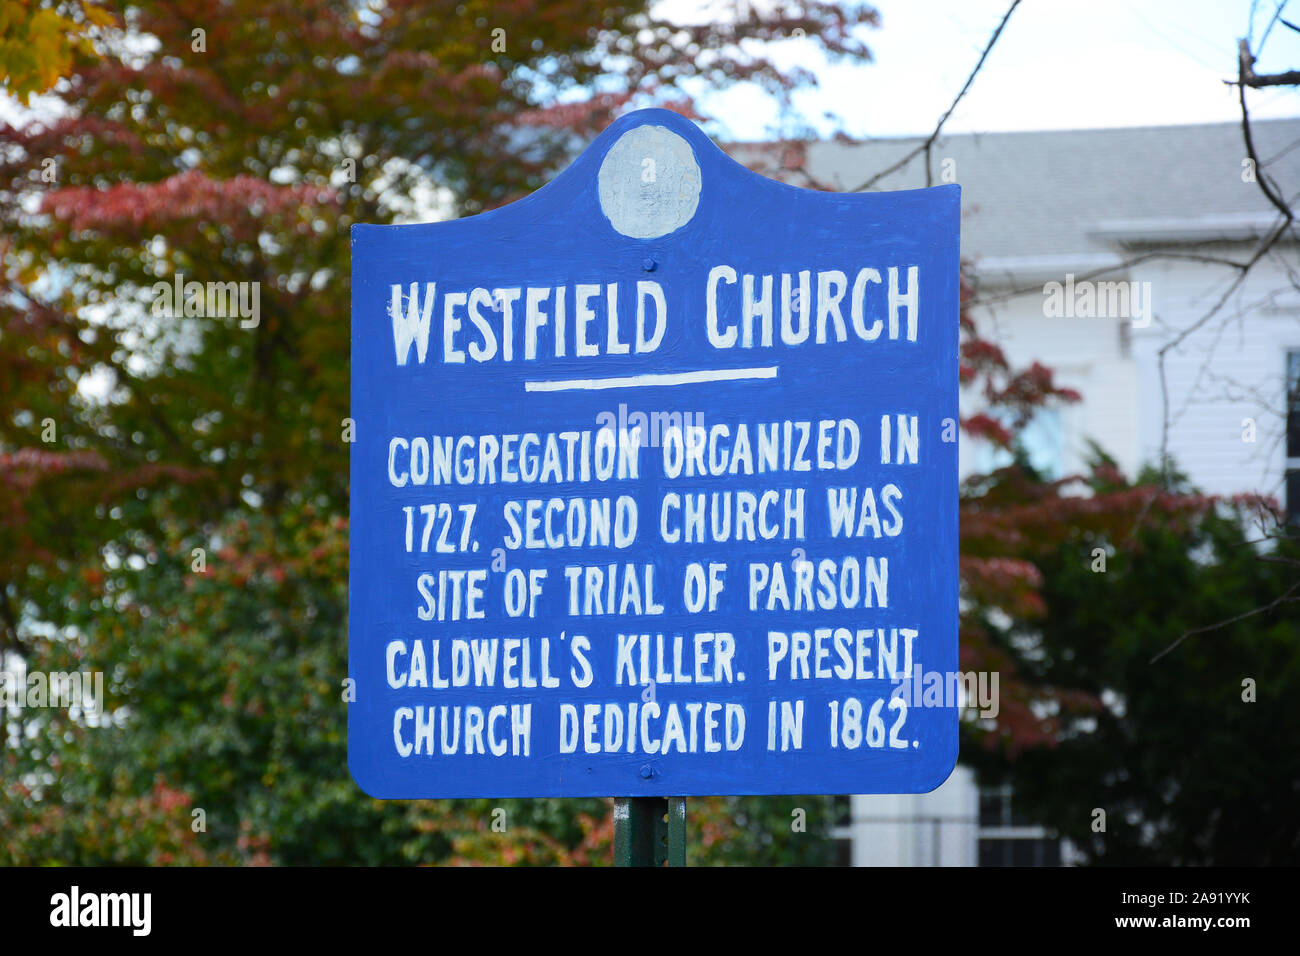 WESTFIELD, NEW JERSEY - 02 NOV 2019: Sign for the Westfield Church a historic house of worship in the small town. Stock Photo